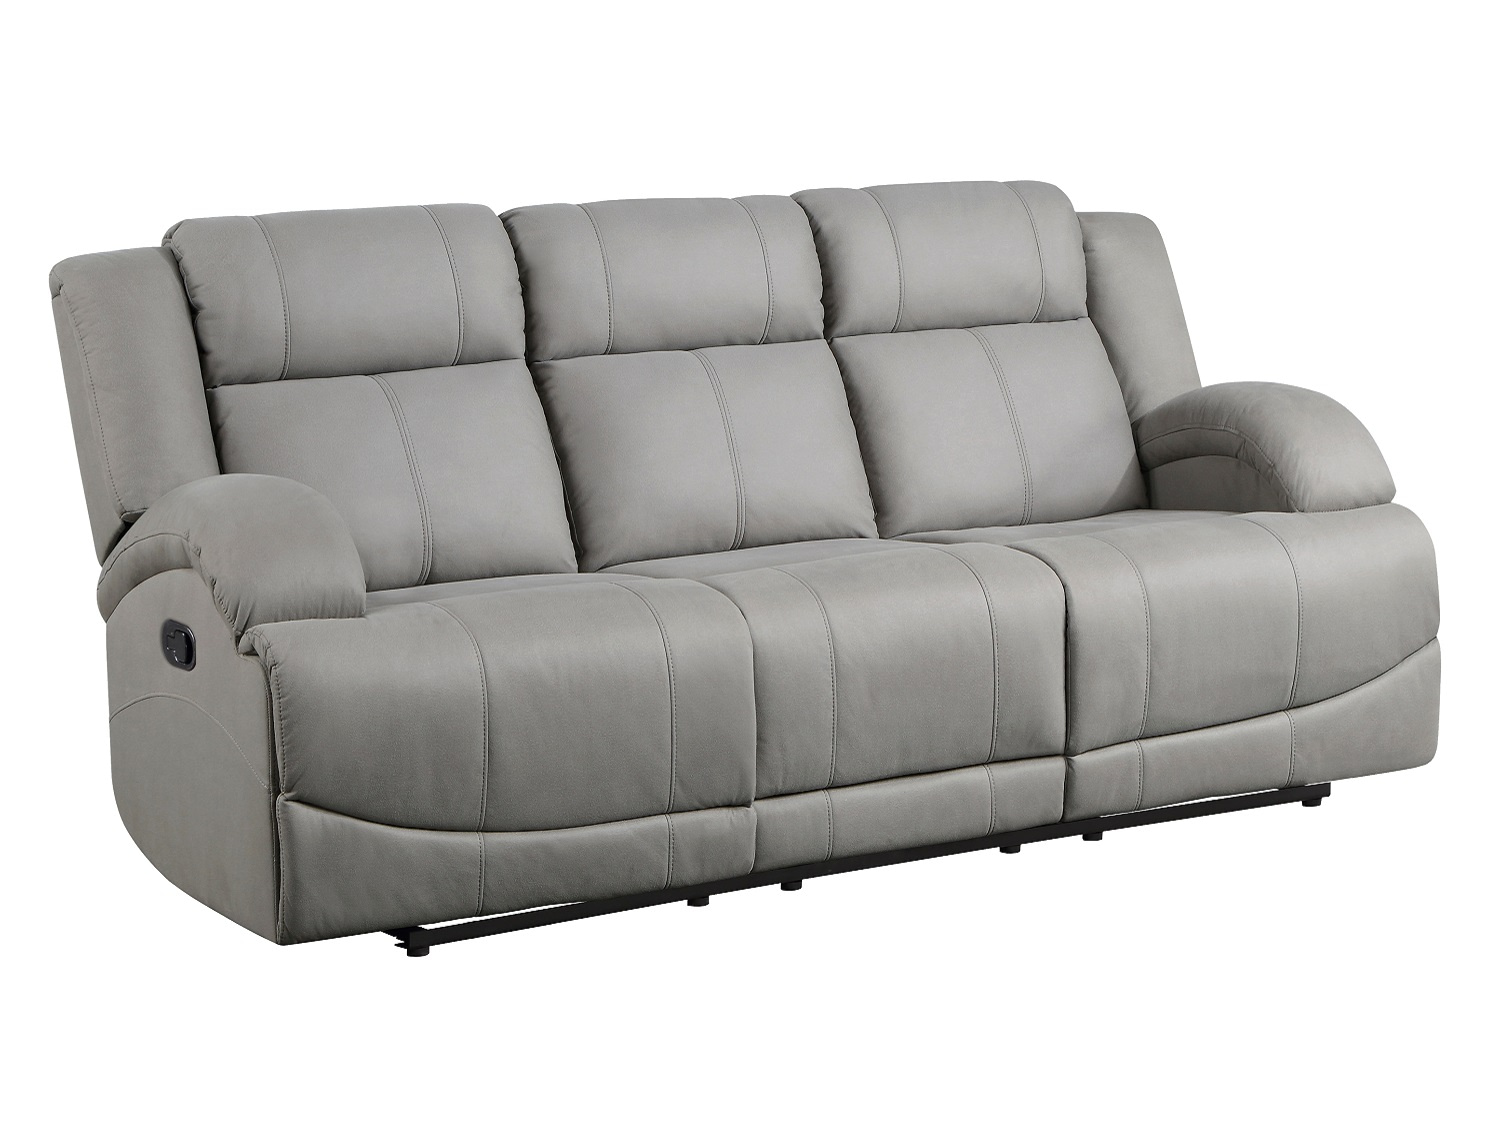 QUINCY Reclining Sofa - Side